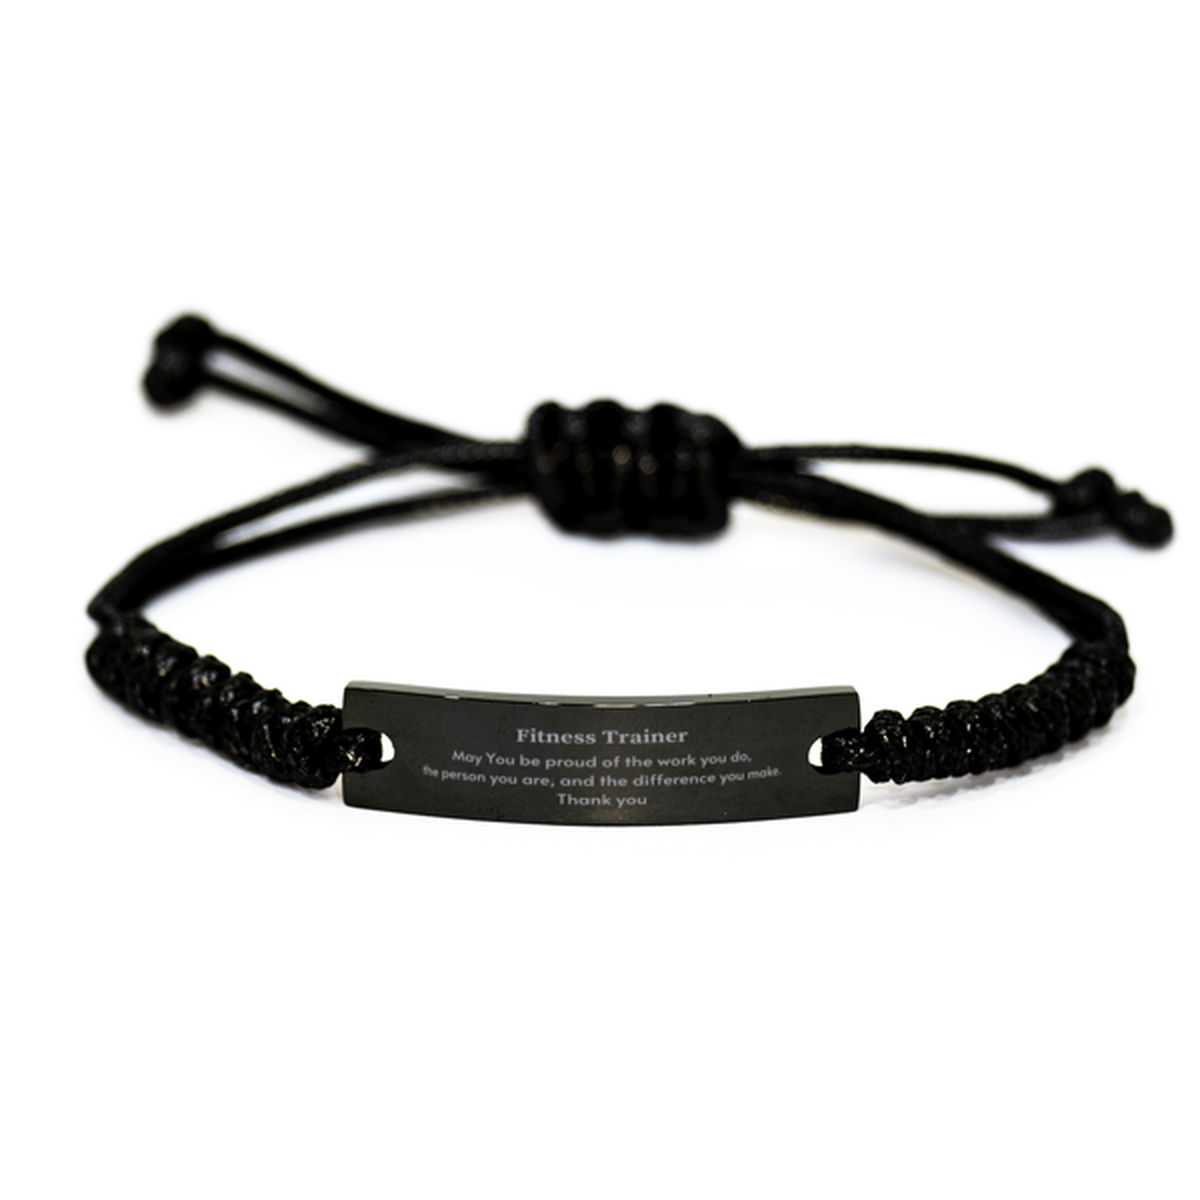 Heartwarming Black Rope Bracelet Retirement Coworkers Gifts for Fitness Trainer, Fitness Trainer May You be proud of the work you do, the person you are Gifts for Boss Men Women Friends